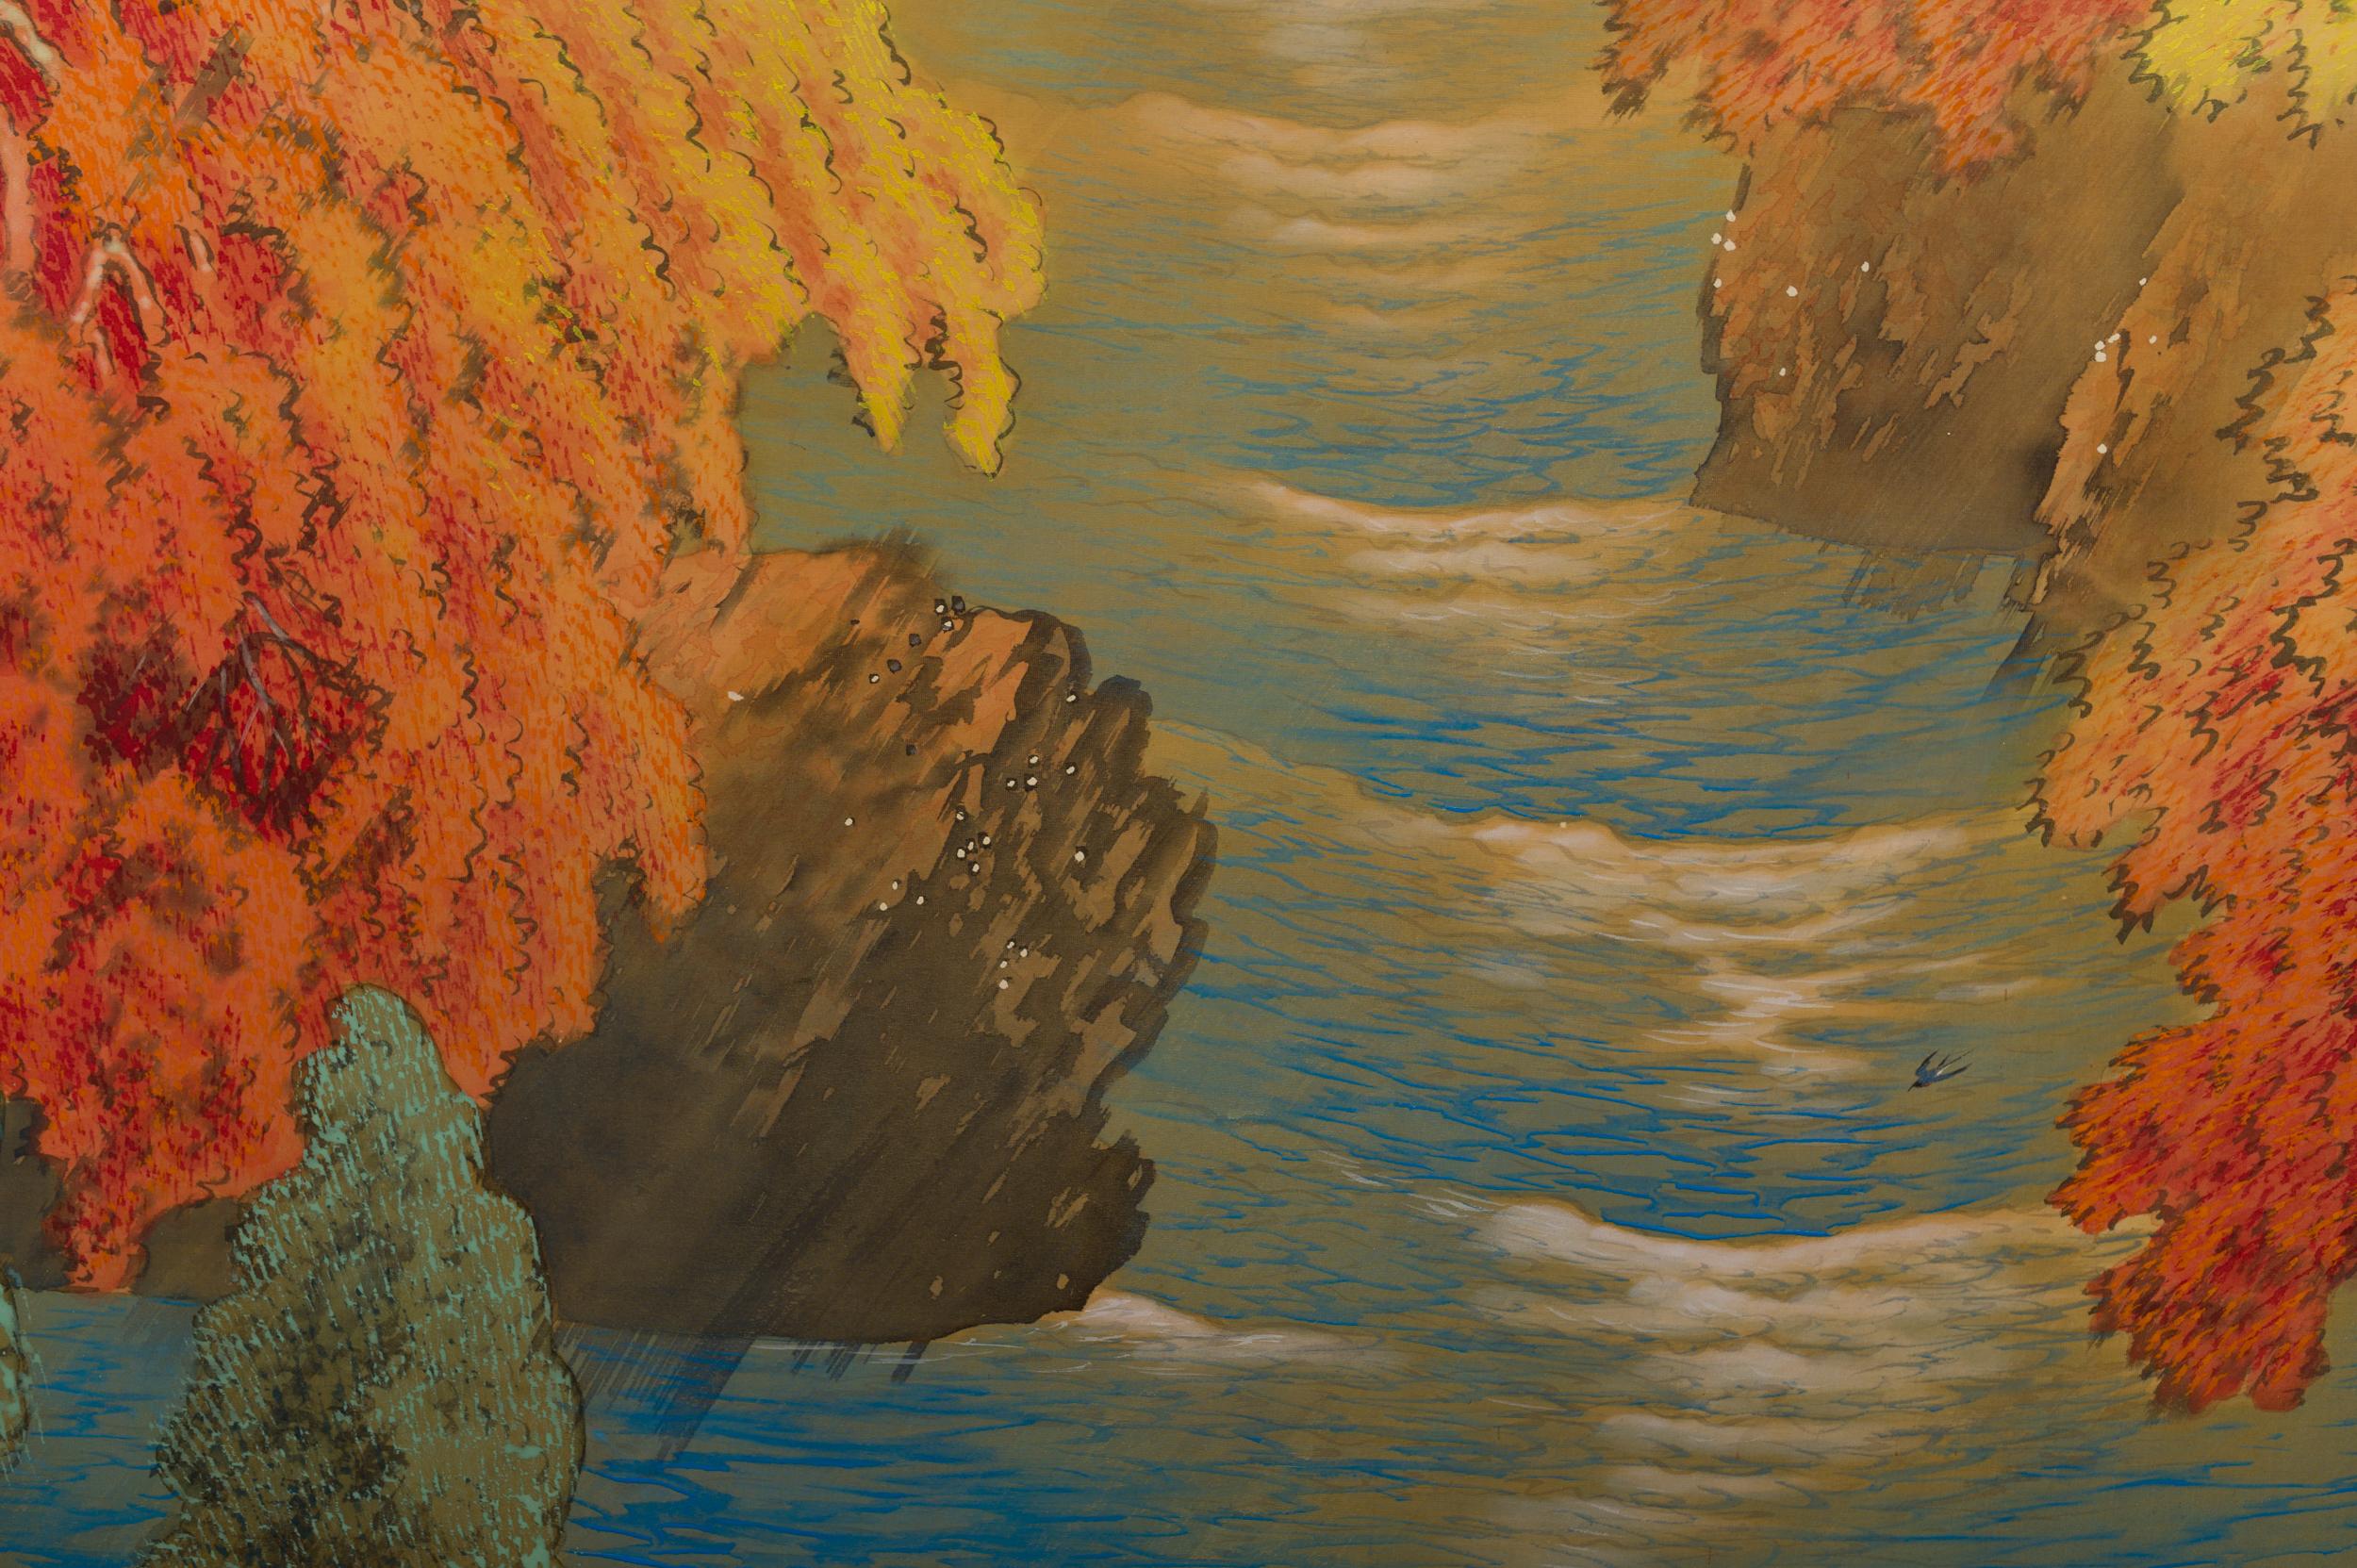 Showa Japanese Two-Panel Screen, Autumn Colored Canyon in the Mist